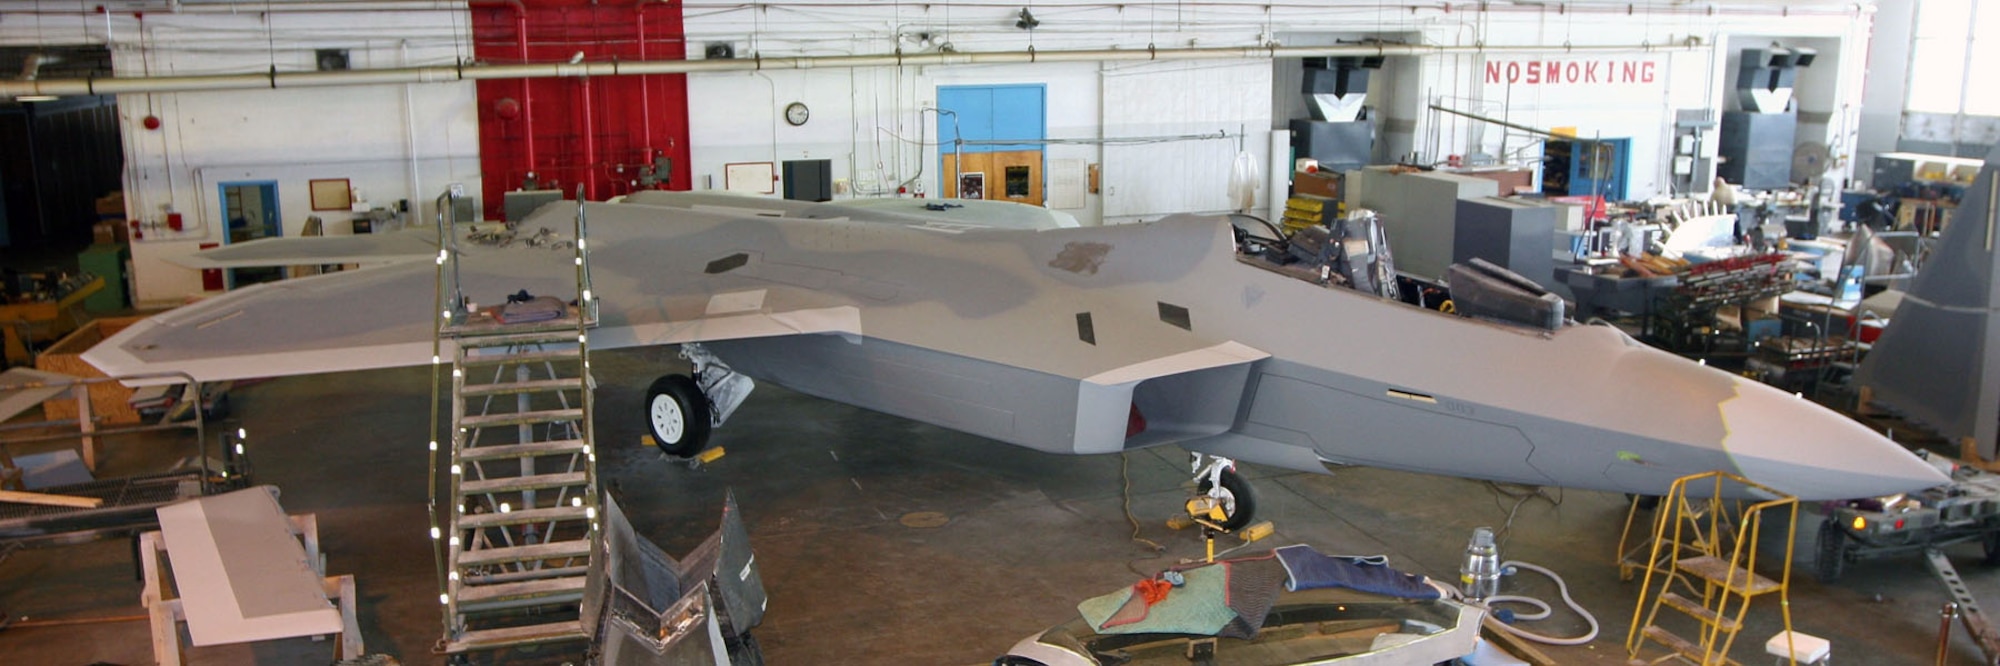 DAYTON, Ohio (07/2007) -- F-22A Raptor in the National Museum of the U.S. Air Force's restoration hangar. (Photo courtesy of Craig Scaling, Airshow Traveler)